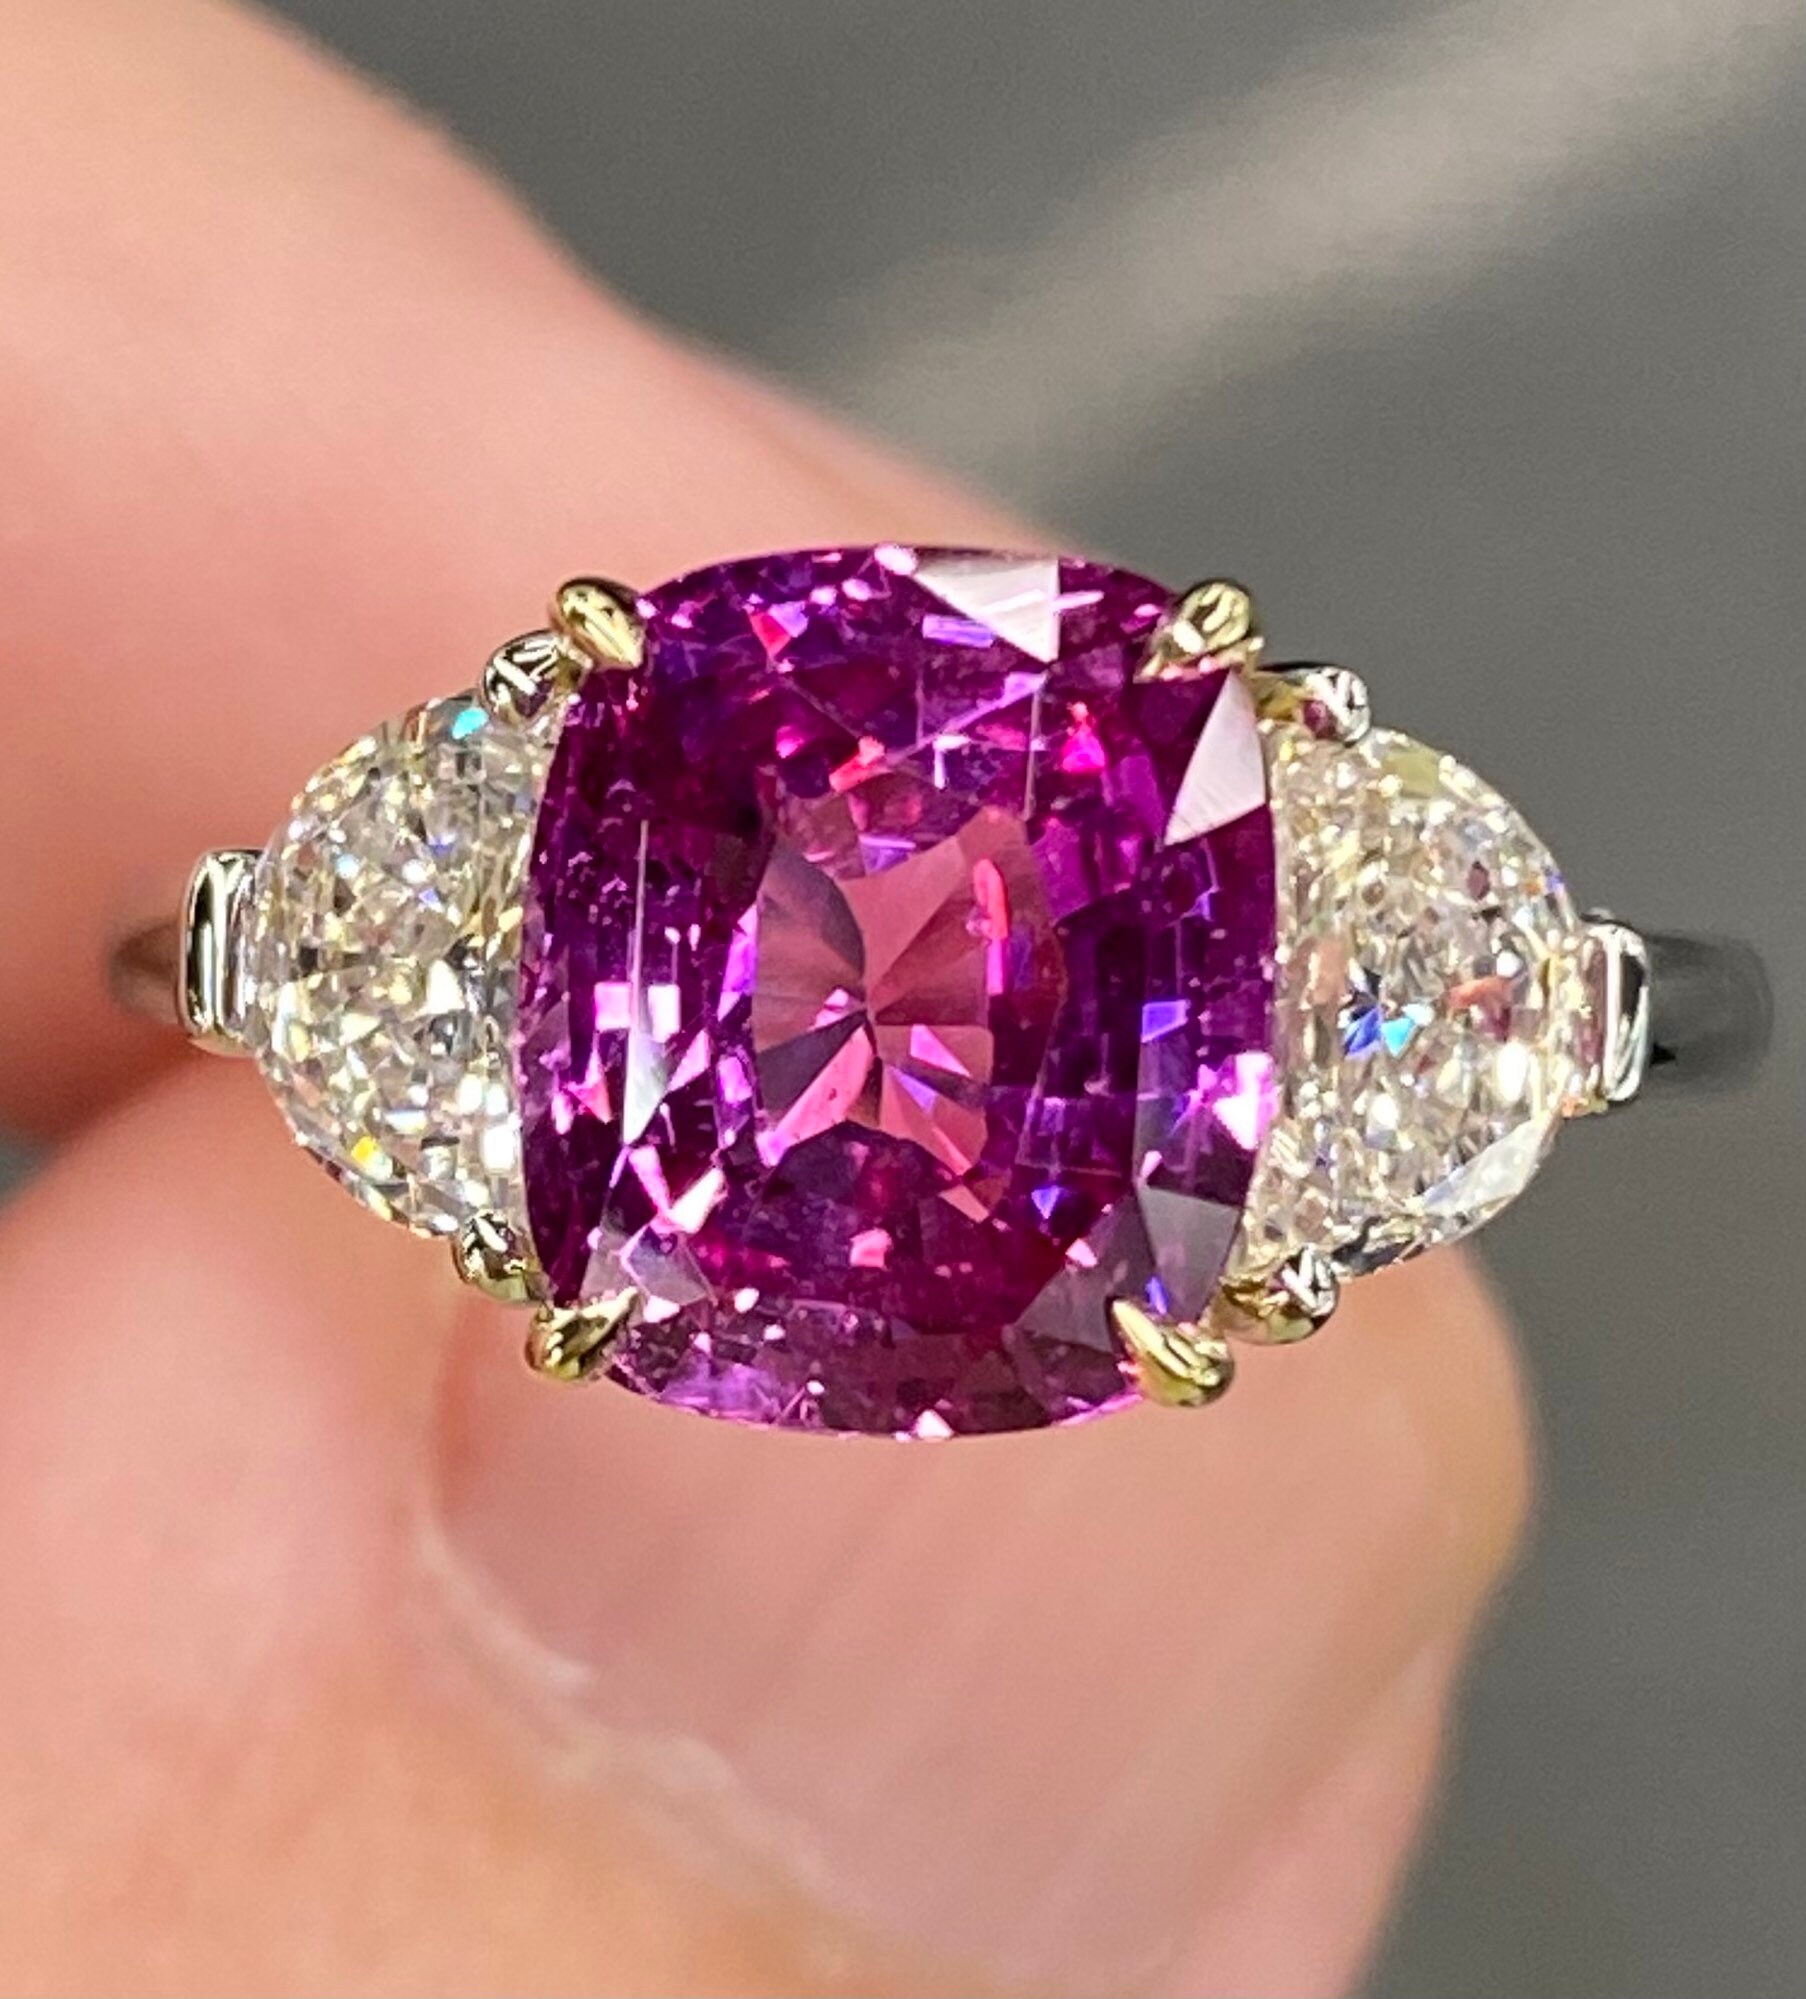 Exceptional GIA 5.2 Ctw Hot Pink Sapphire & F VVS Diamond Ring Platinum 18K  Gold Oval Engagement Half Moon Three Stone - Etsy